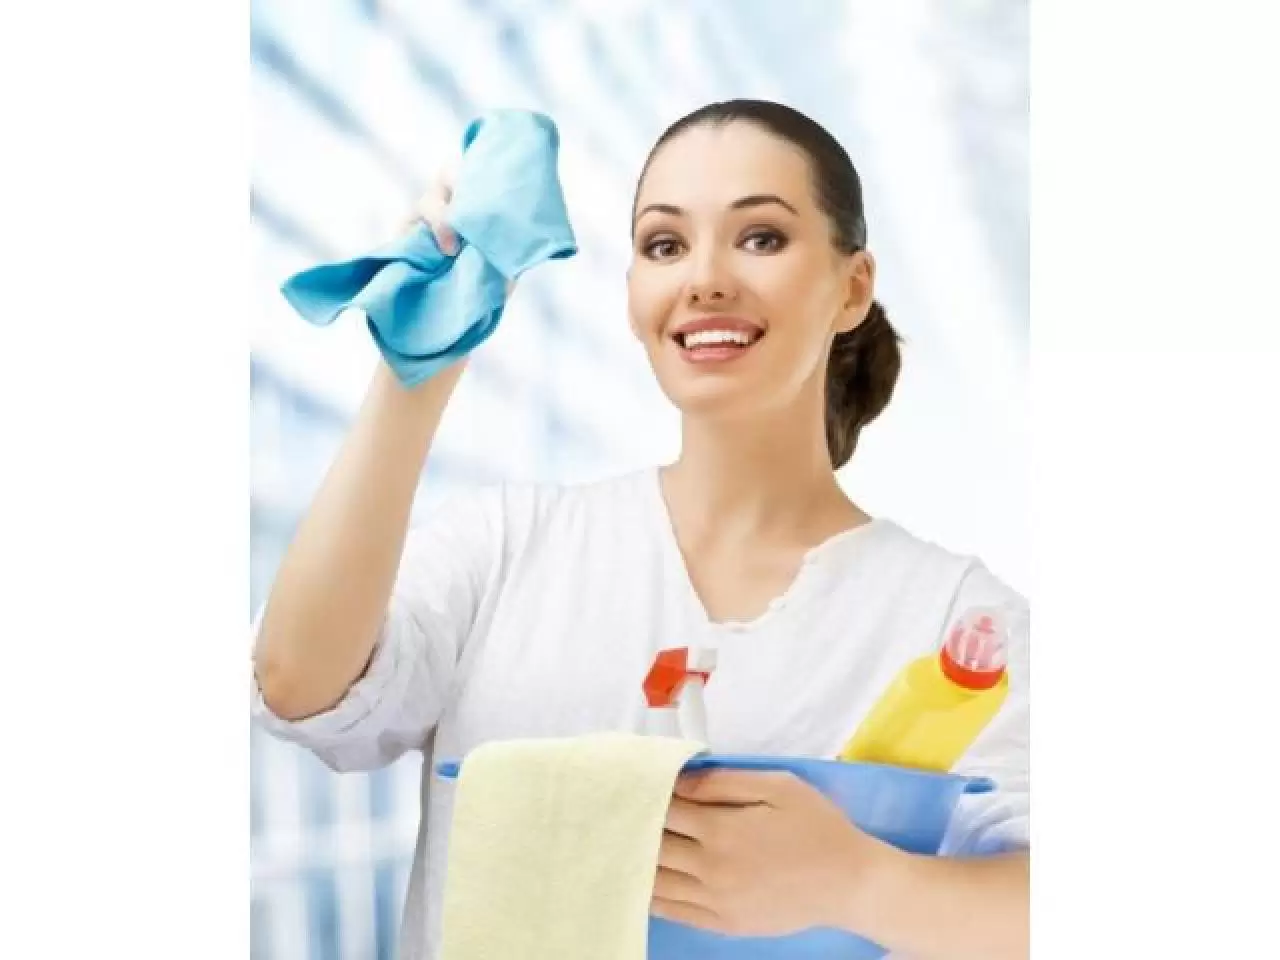 Cleaning services from A to Z - 1